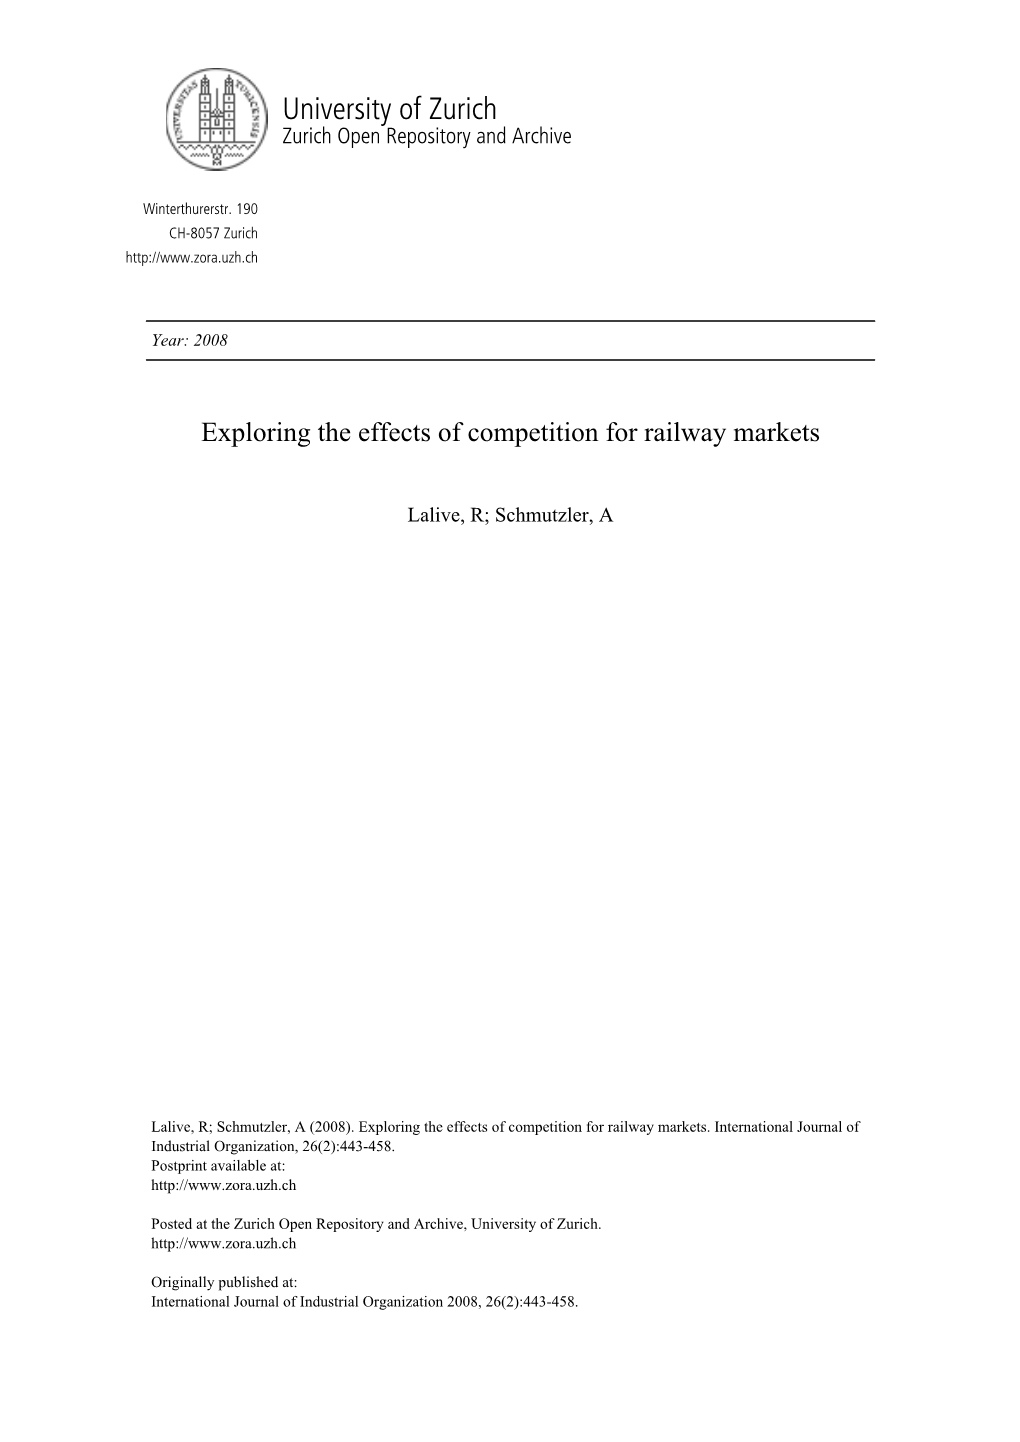 'Exploring the Effects of Competition for Railway Markets'